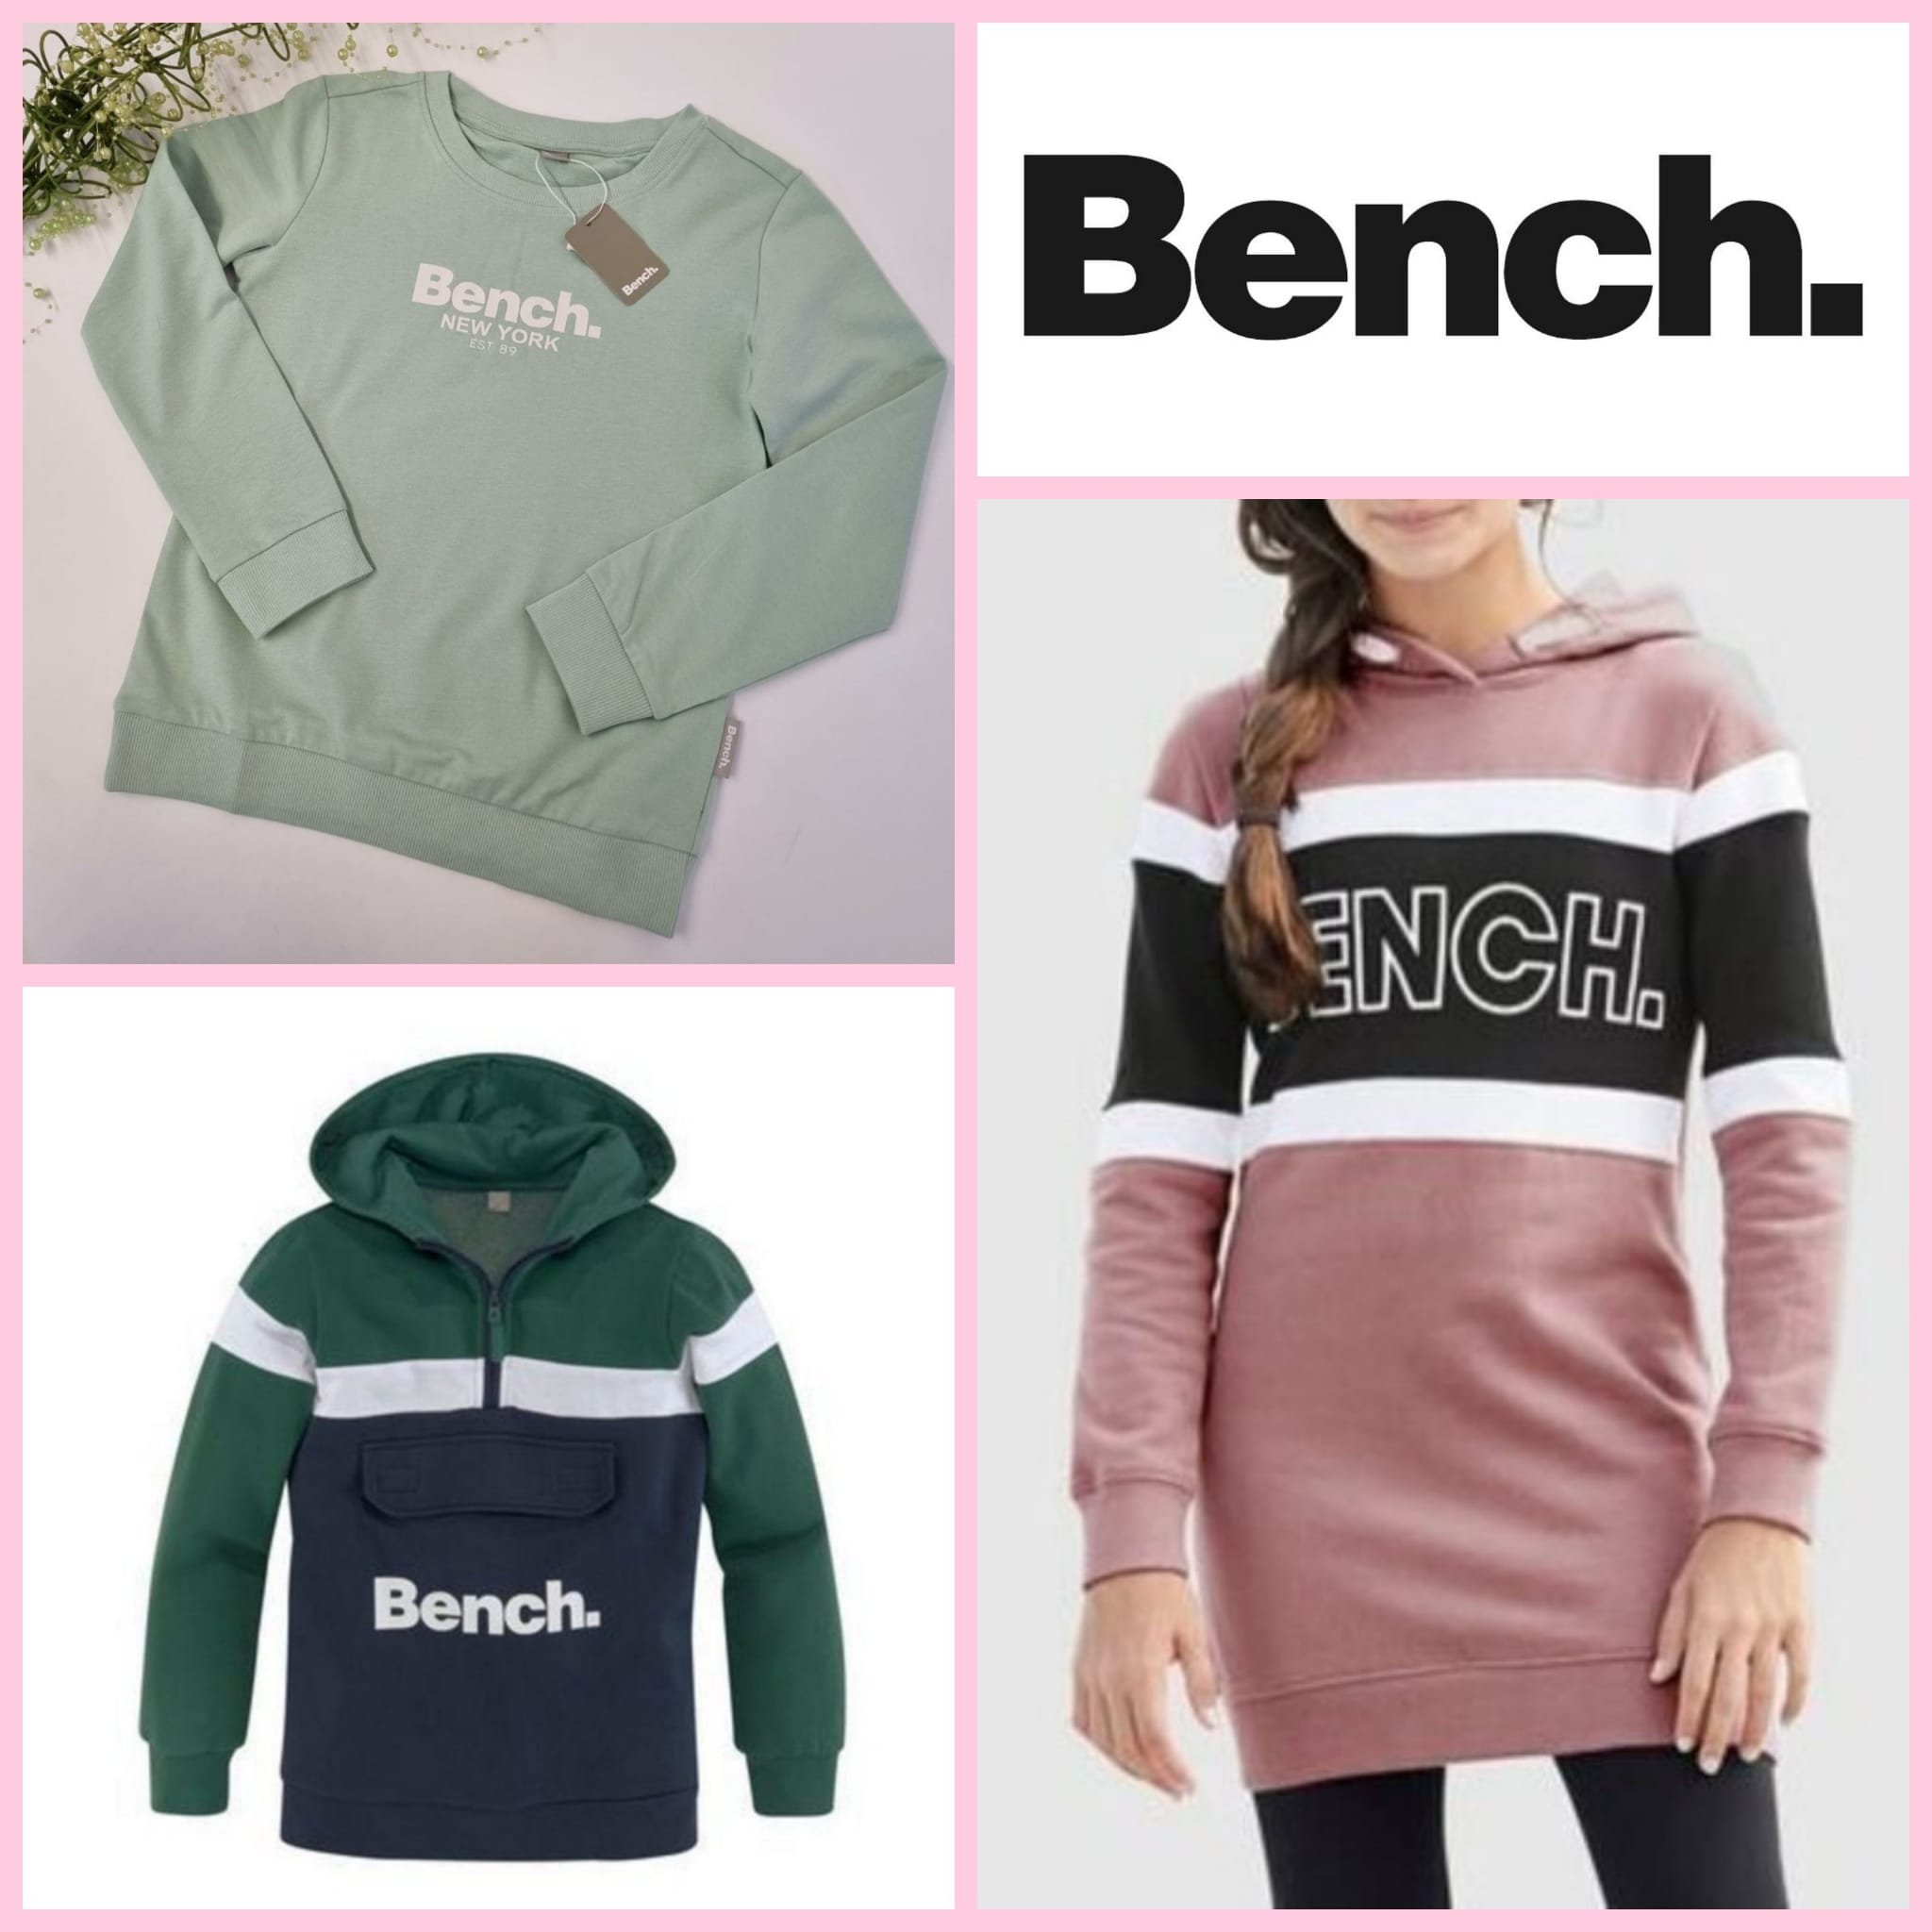 Mix of sweatshirts for teenagers from Bench